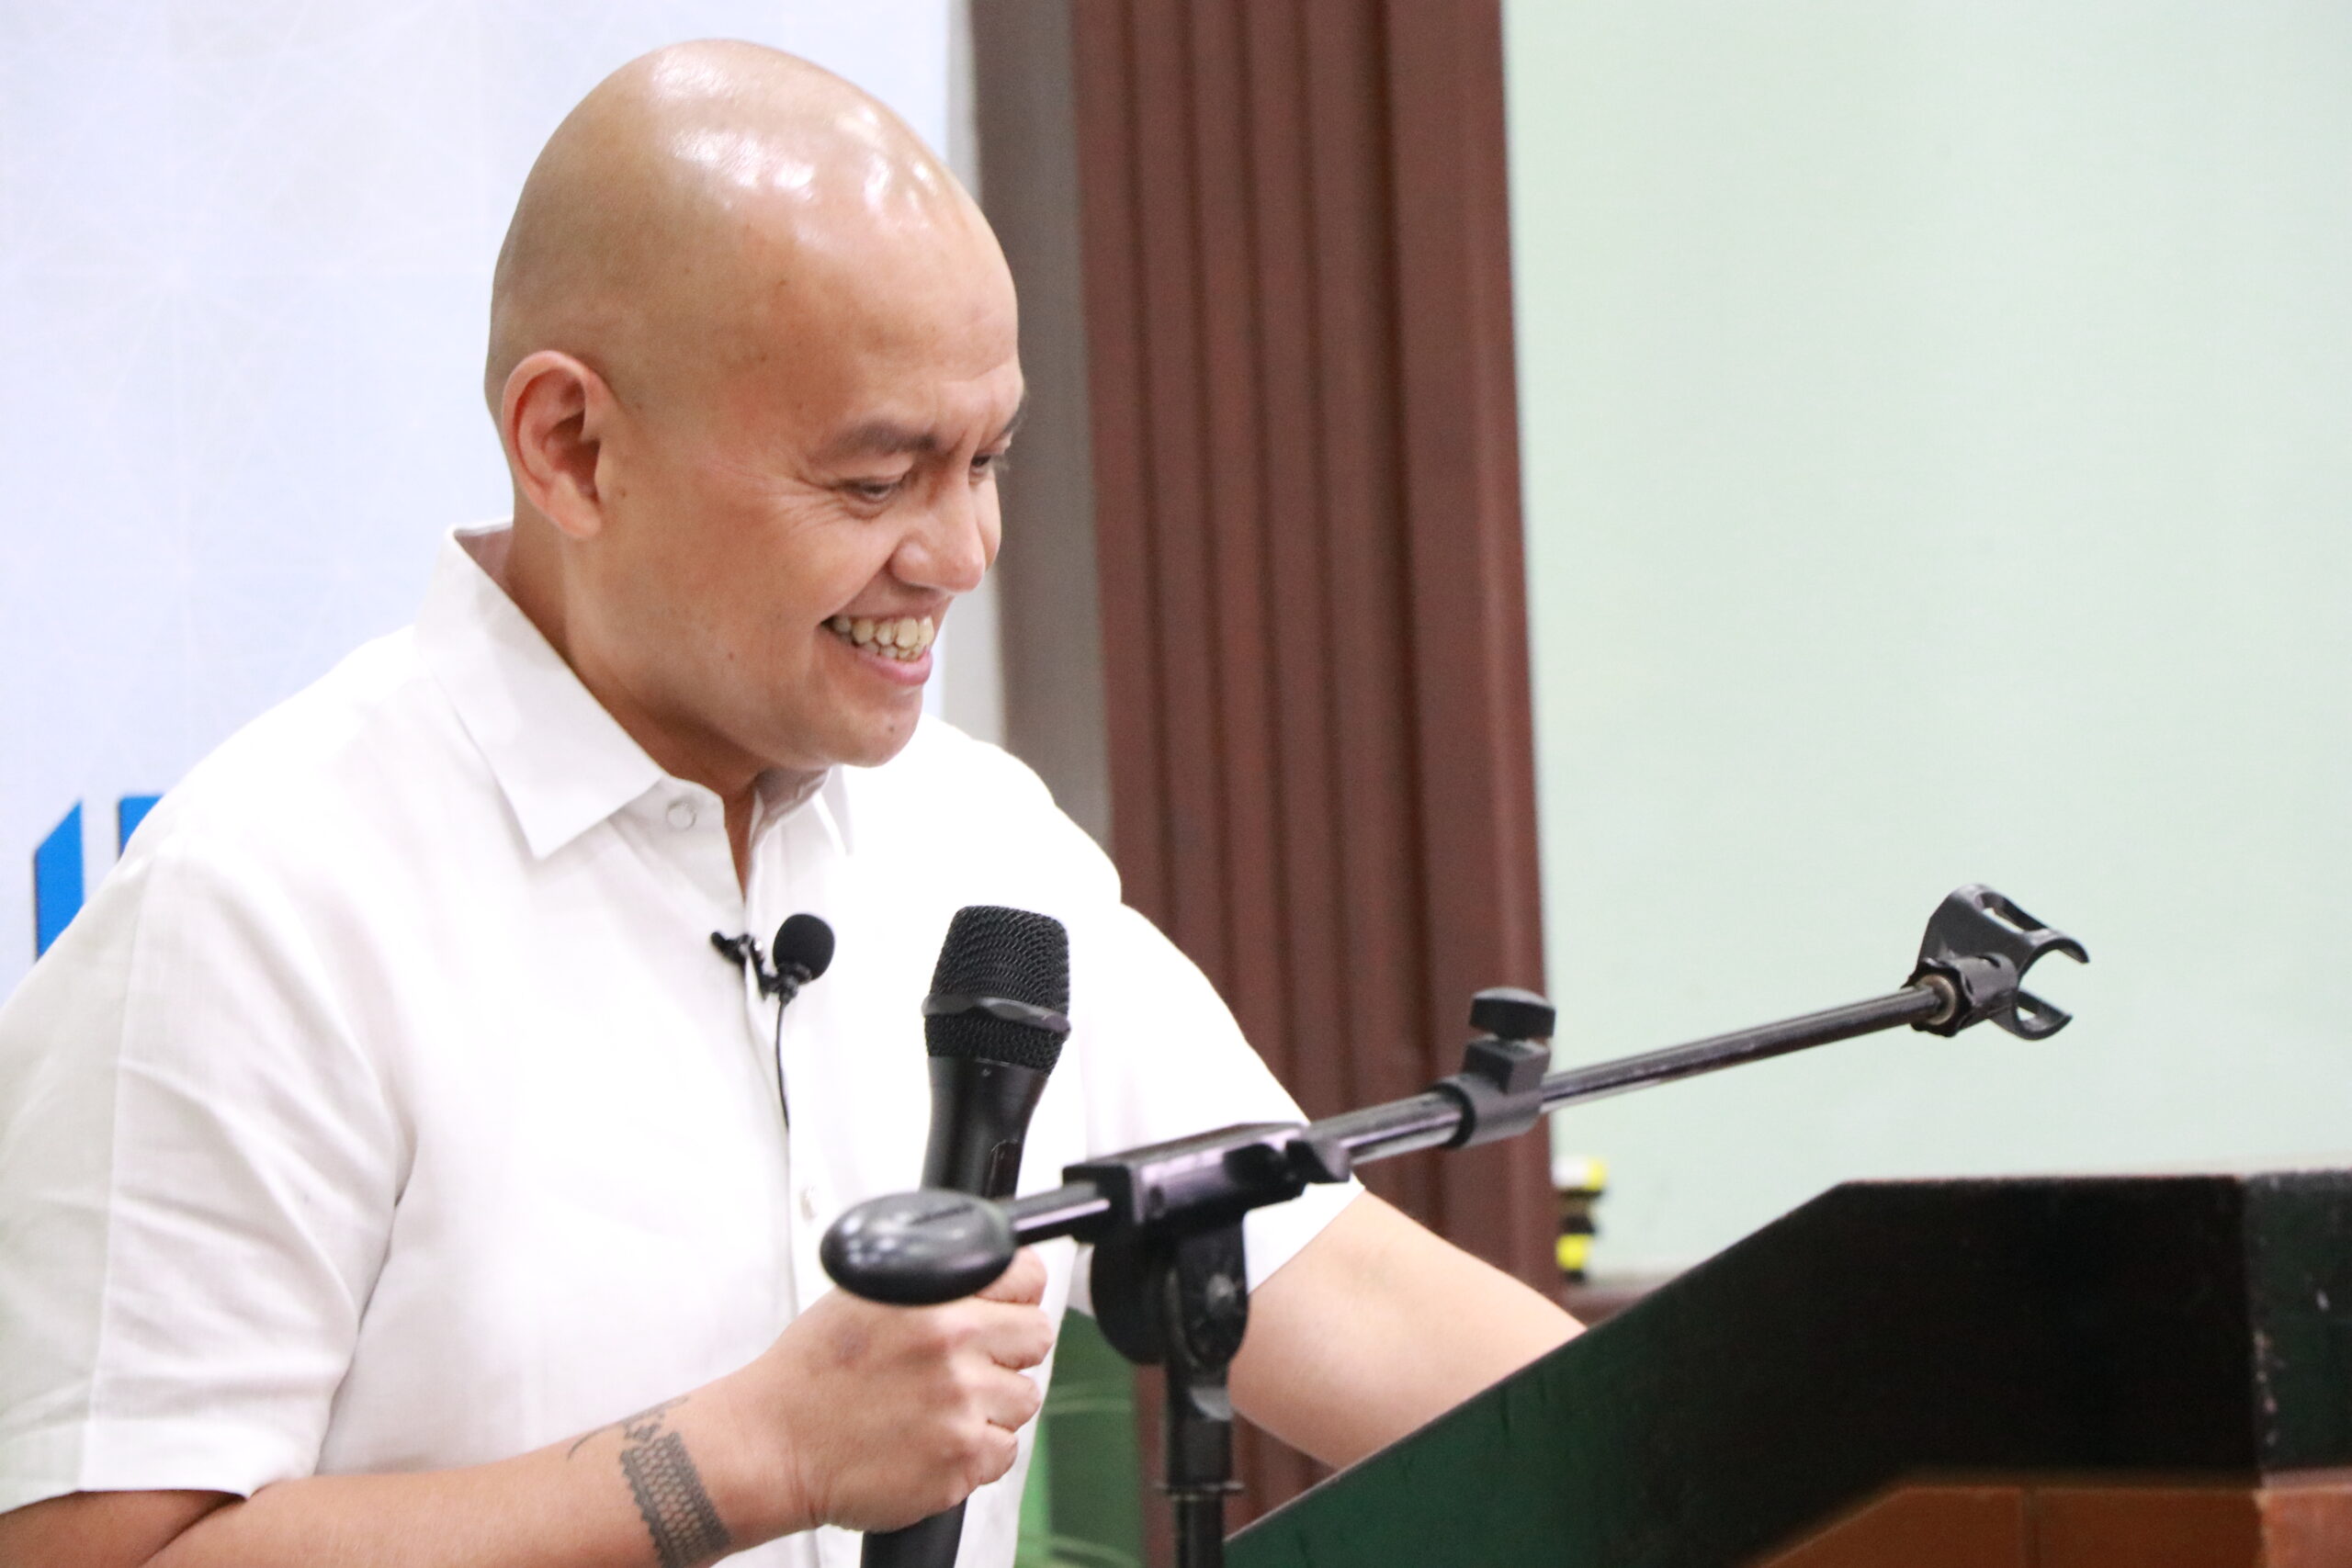 Hon. Senior Associate Justice Marvic M.V.F. Leonen delivers his keynote lecture, “On the Politics of Regulating Intimacy.”